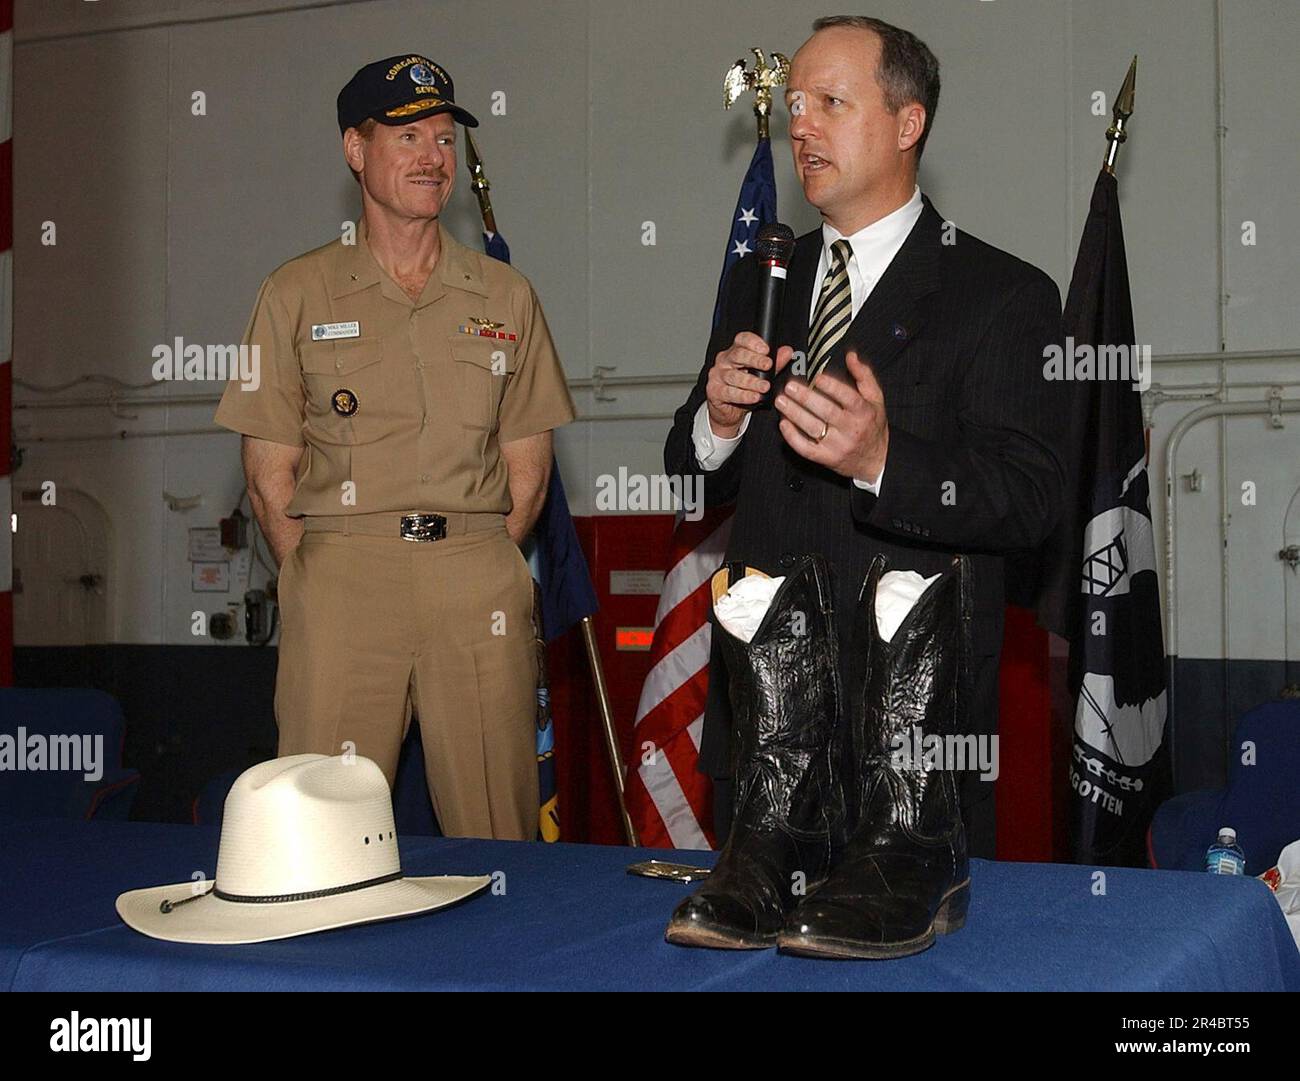 US Navy  Executive Director of the Ronald Reagan Presidential Library, Duke Blackwood, right, explains the history of a pair of boots and cowboy hat worn by President Ronald Reagan. Stock Photo